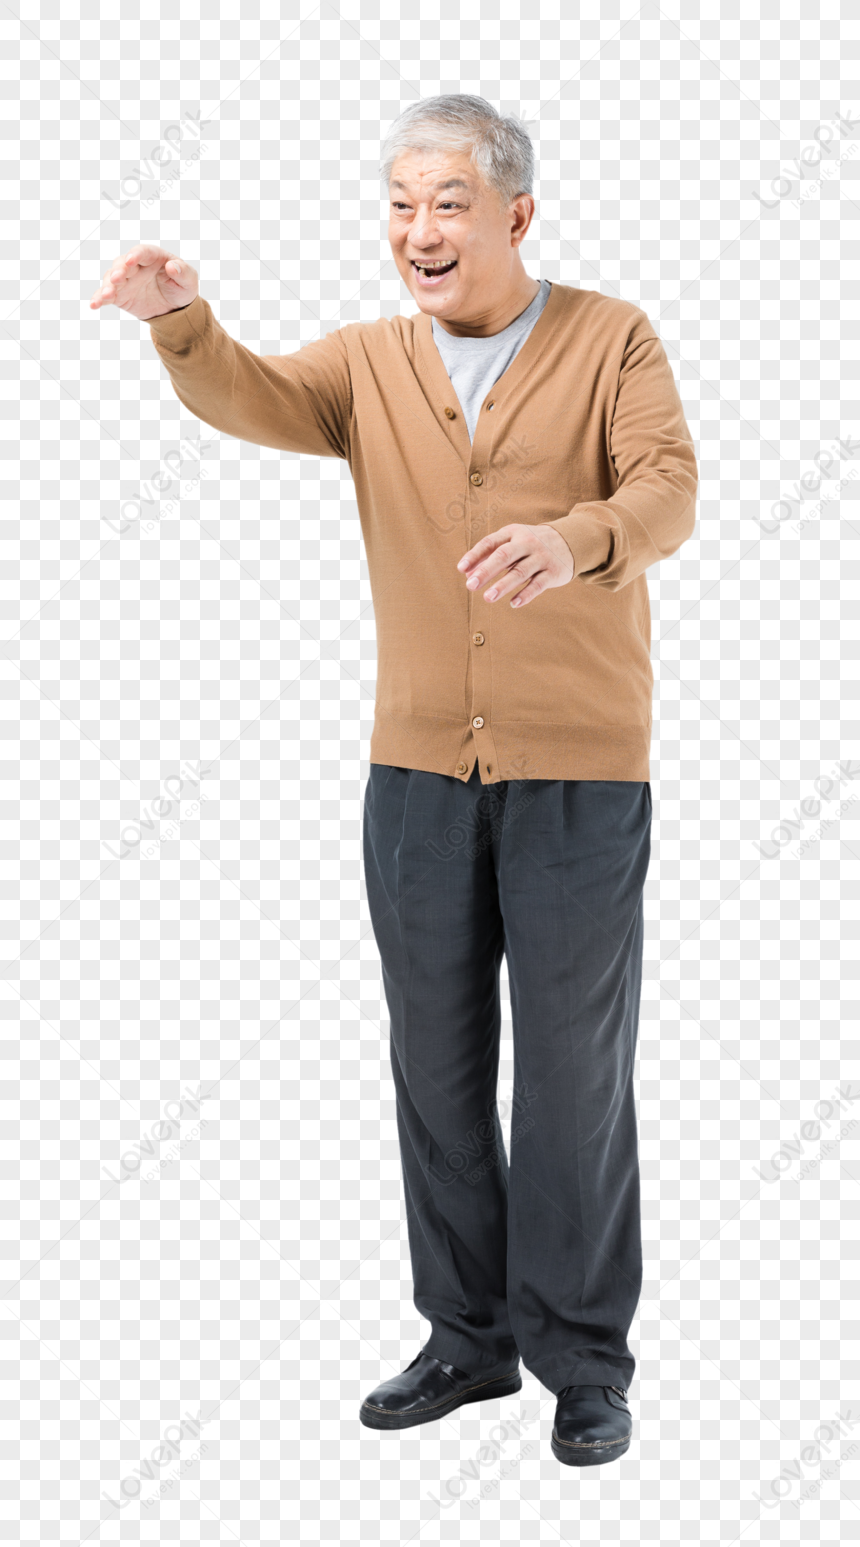 Elderly Male Greeting Image PNG White Transparent And Clipart Image For ...